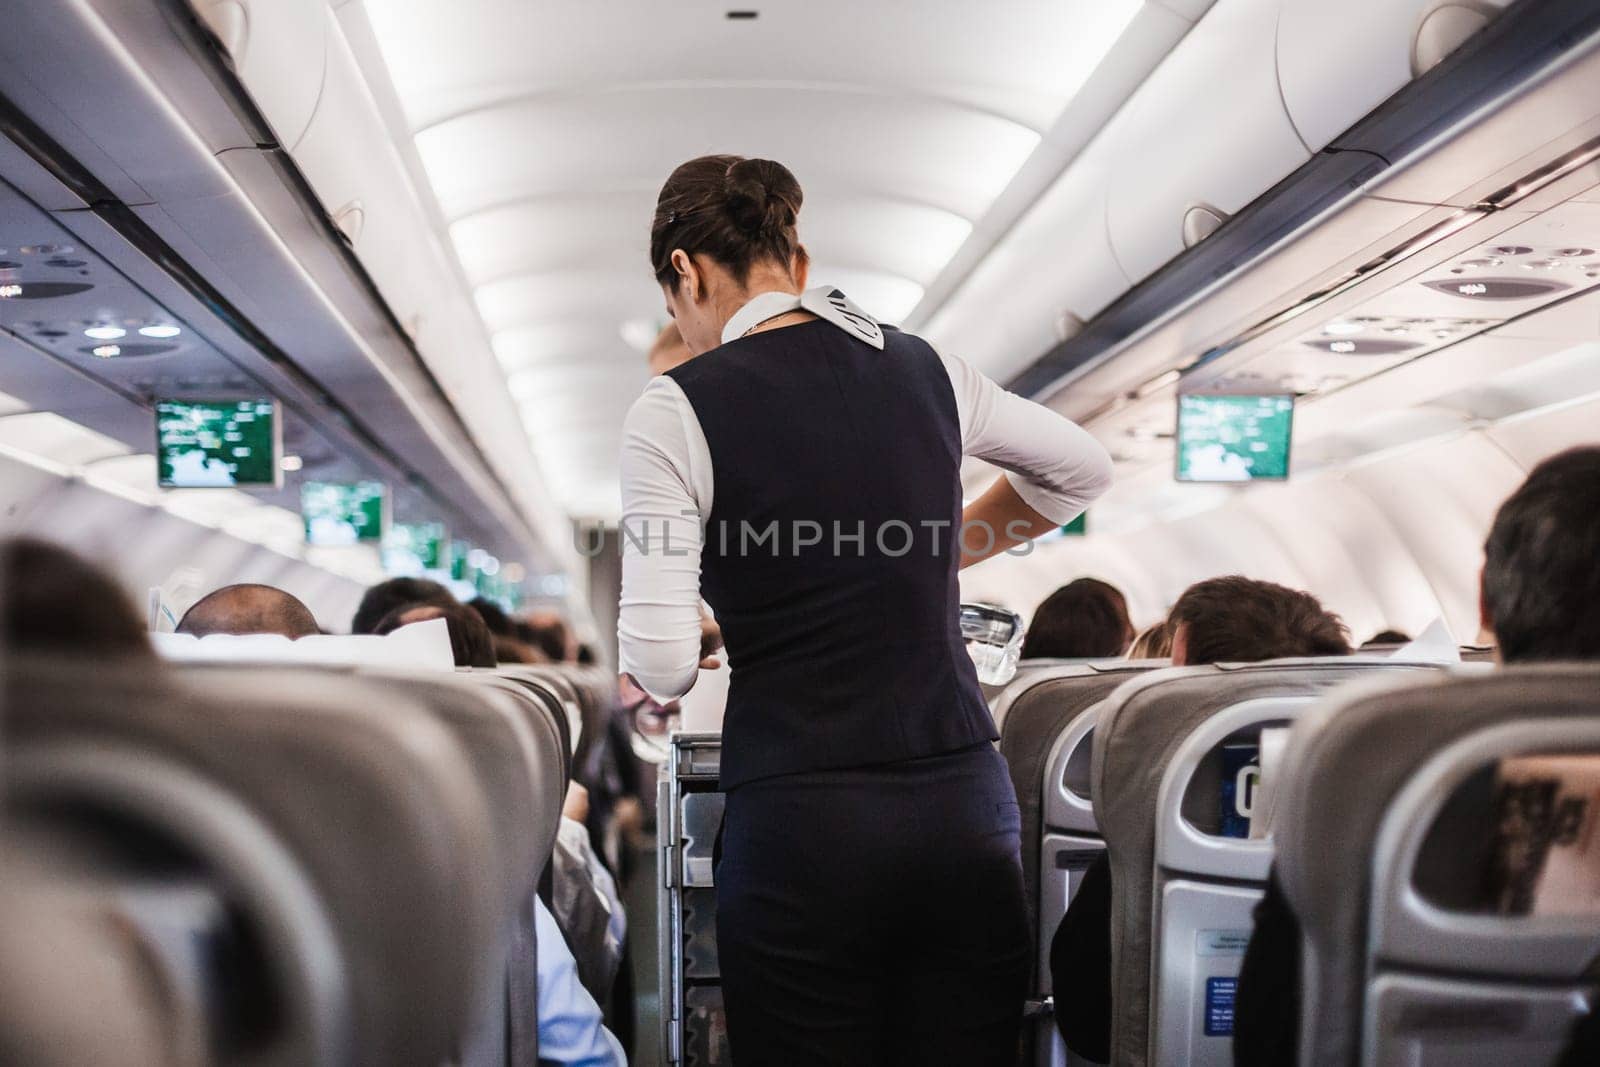 Interior of airplane with passengers on seats and stewardess in uniform walking the aisle, serving people. Commercial economy flight service concept. by kasto